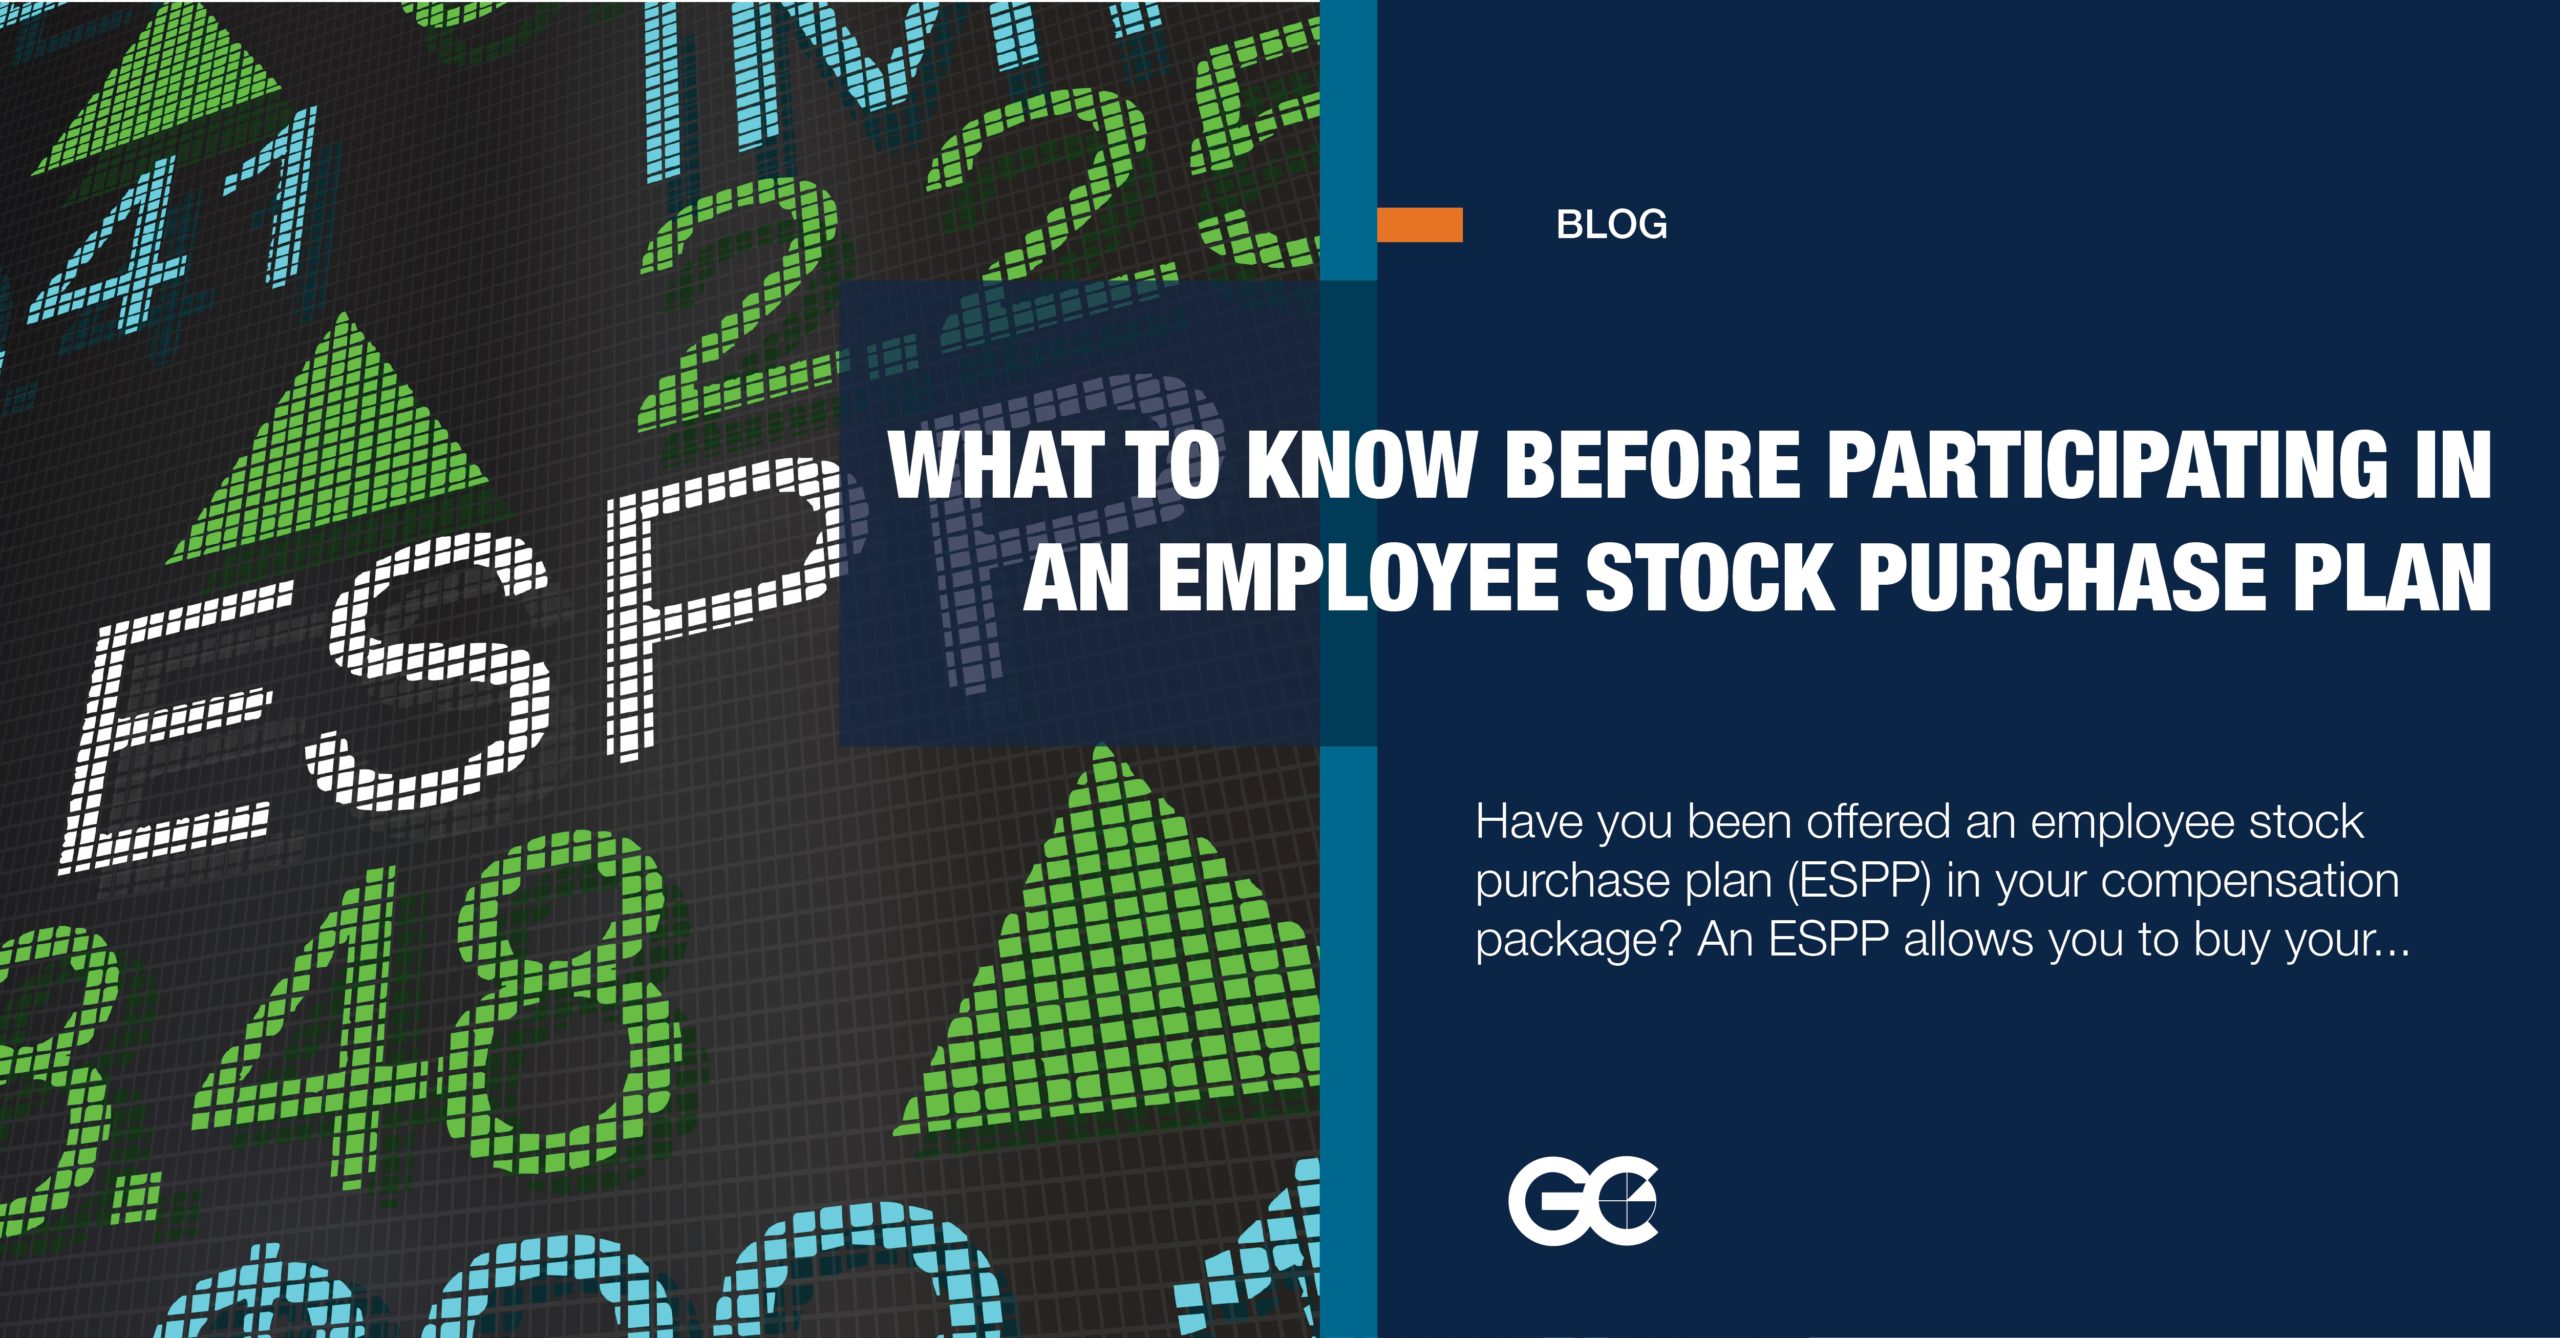 What to Know Before Participating in an Employee Stock Purchase Plan